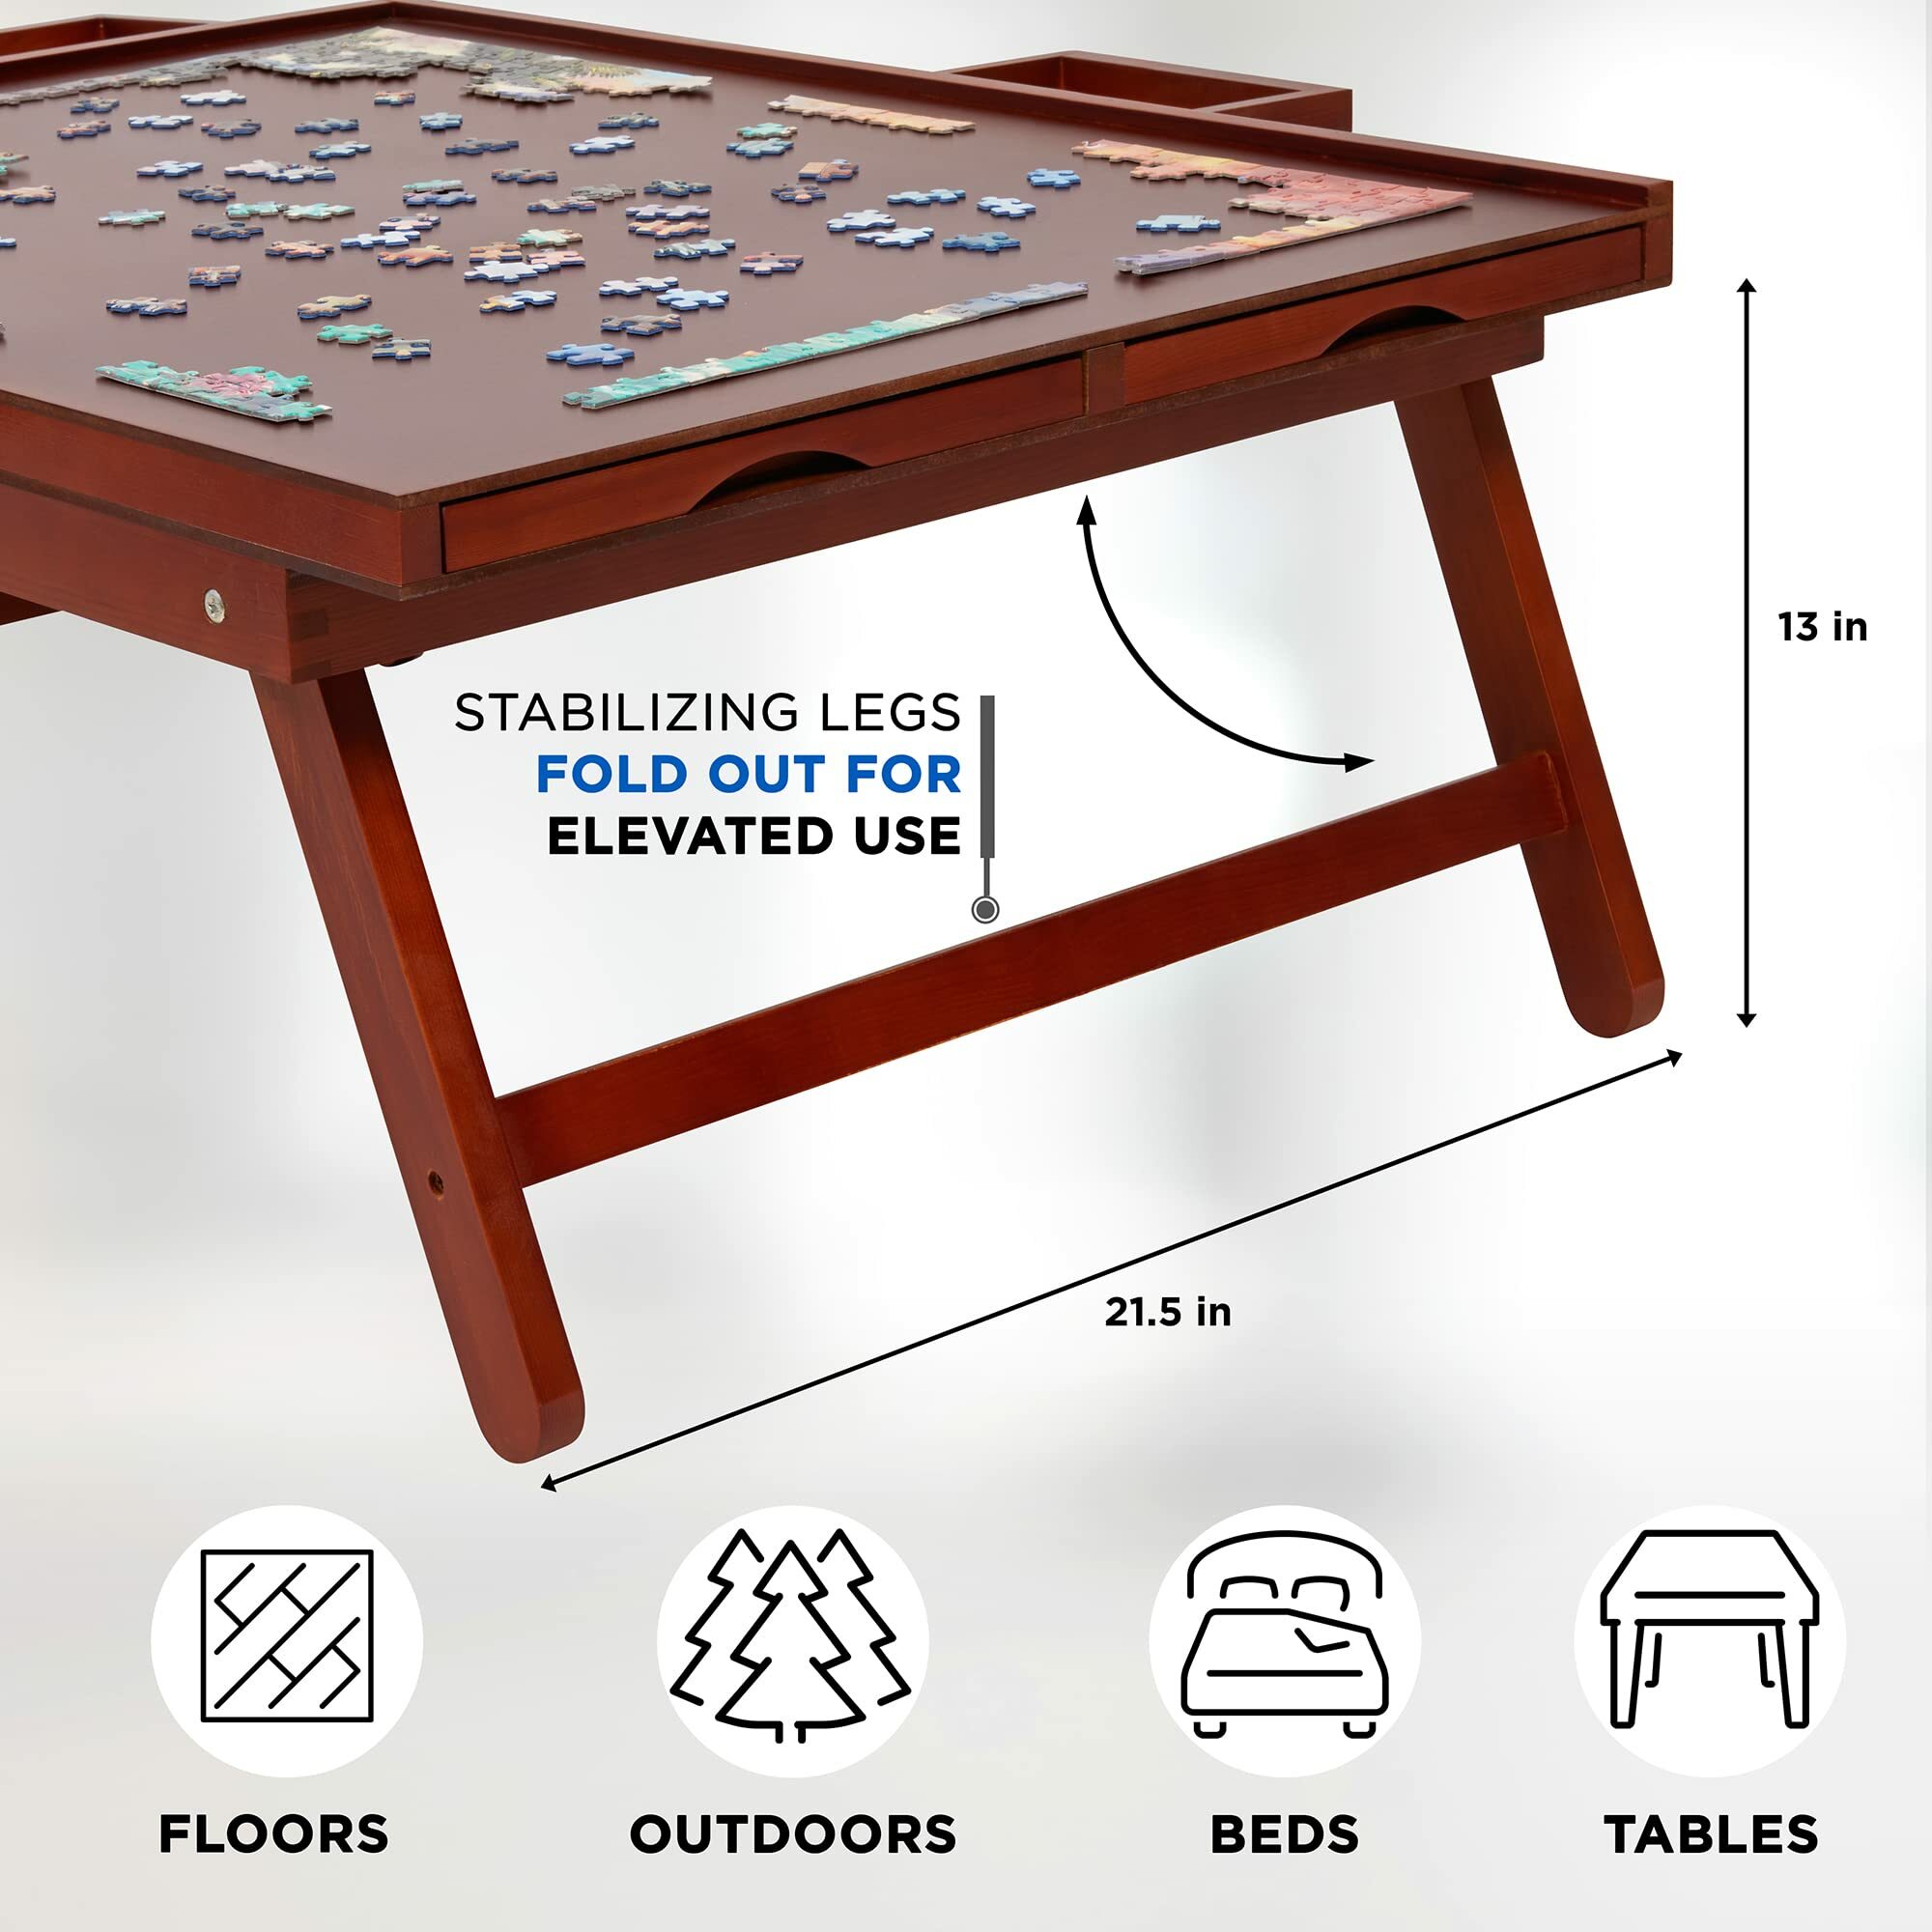 DIY Jigsaw Puzzle Table Plans: The Puzzle Table